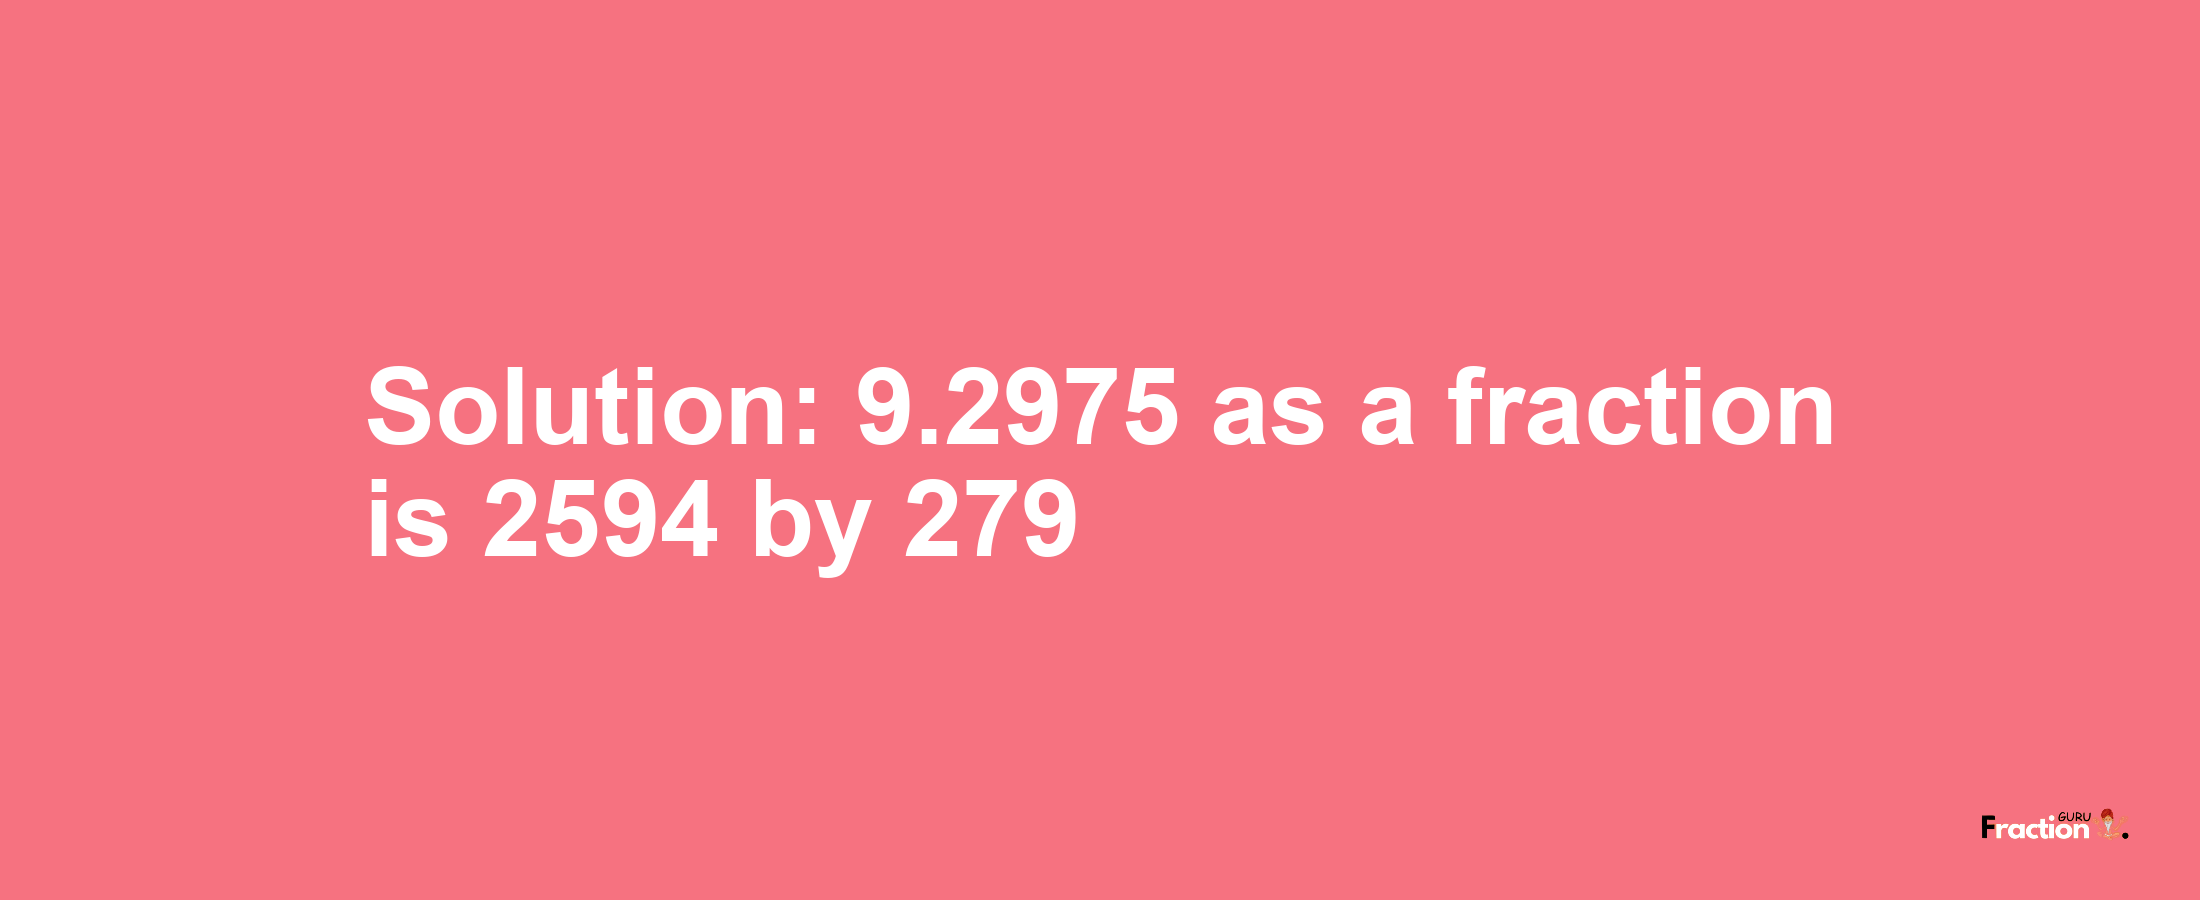 Solution:9.2975 as a fraction is 2594/279